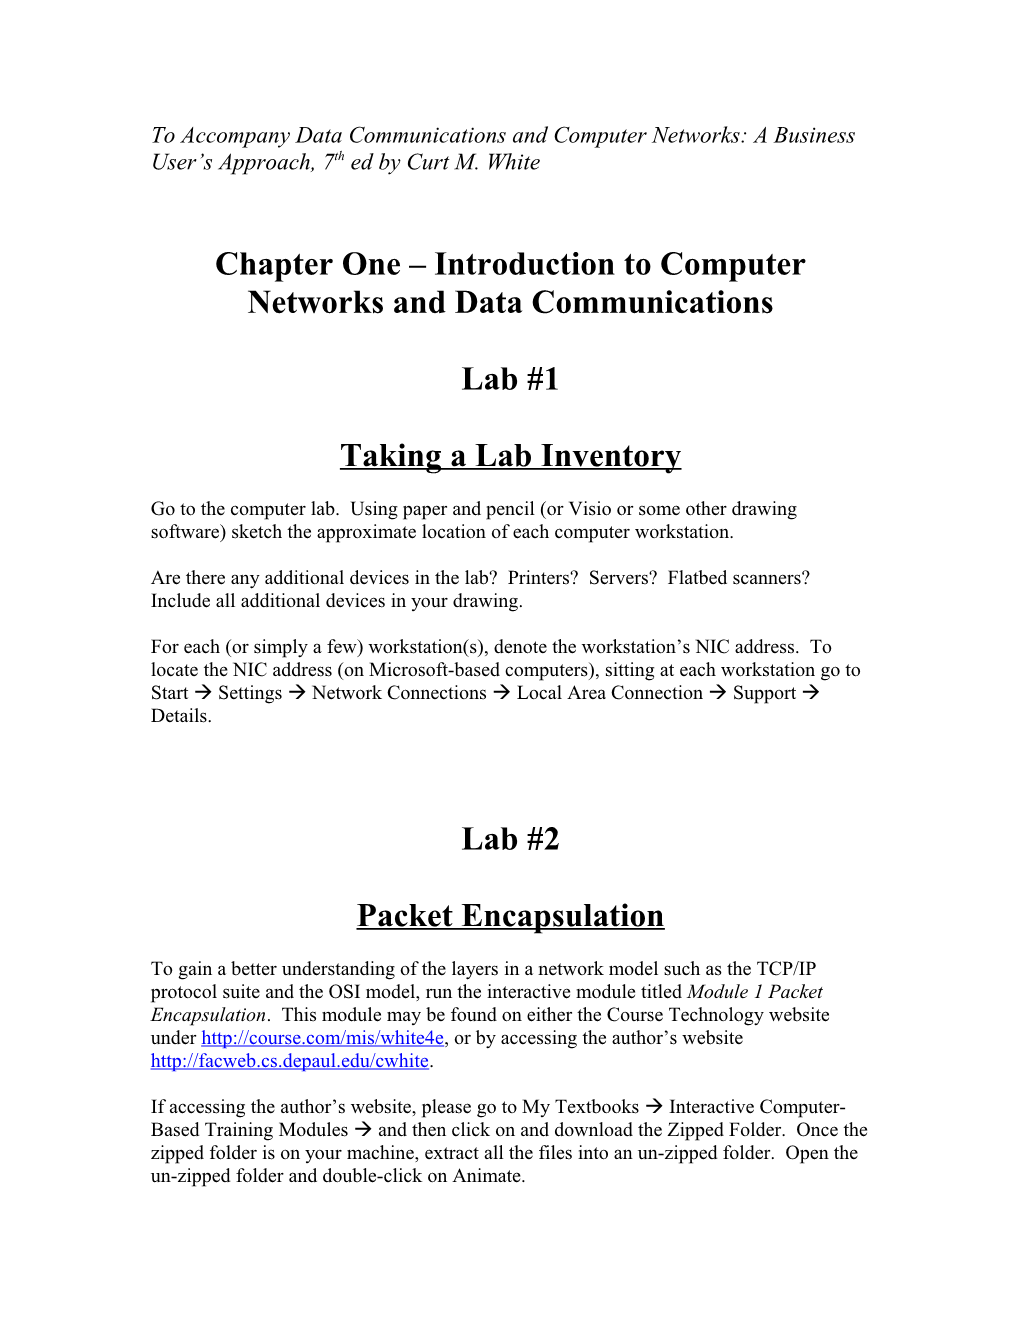 Chapter One Introduction to Computer Networks and Data Communications